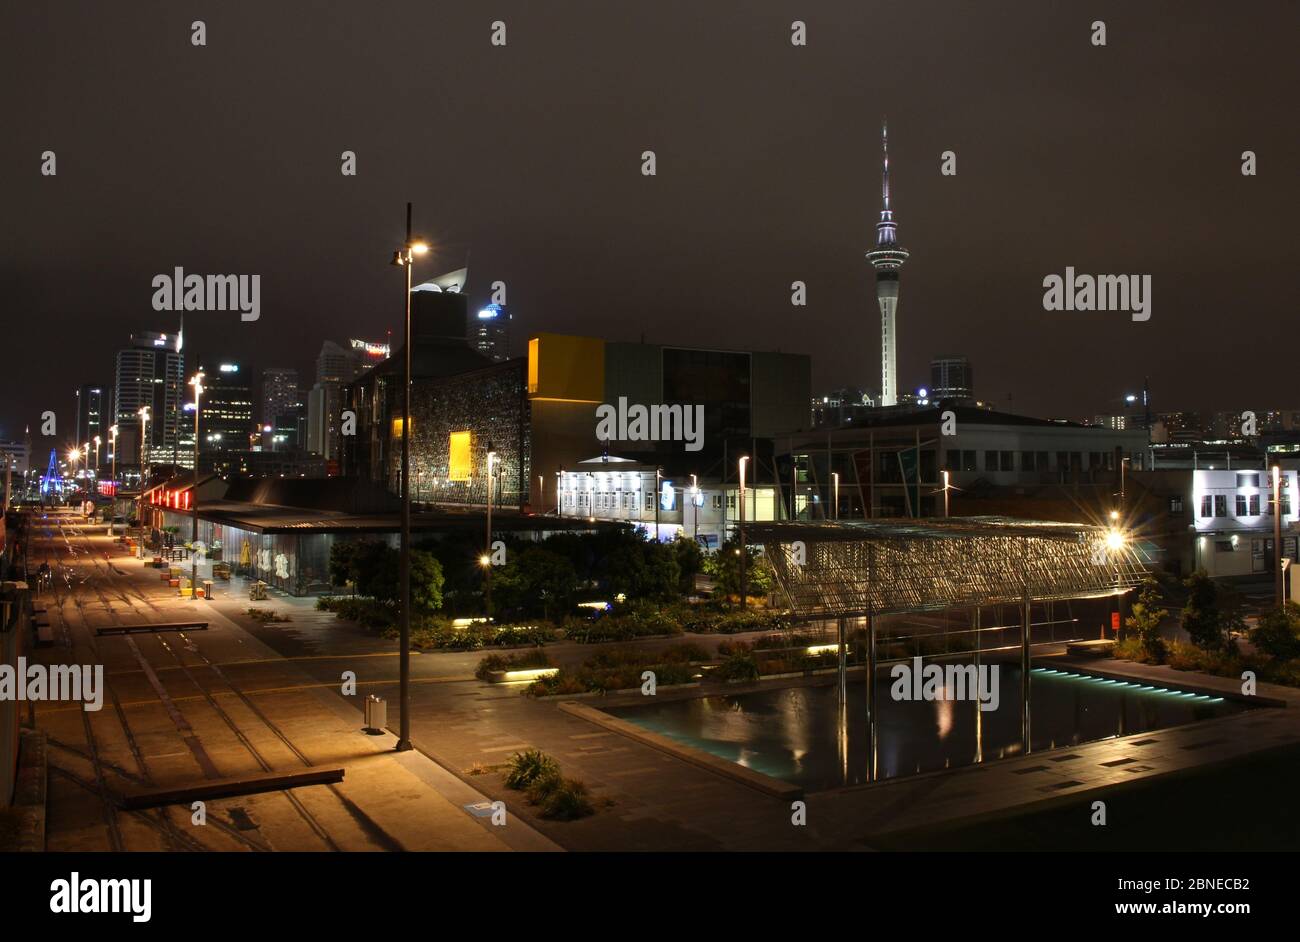 Stunning Shot of empty Auckland Harbour in New Zealand with Sky Tower in the background by Night from a high perspective. Stock Photo